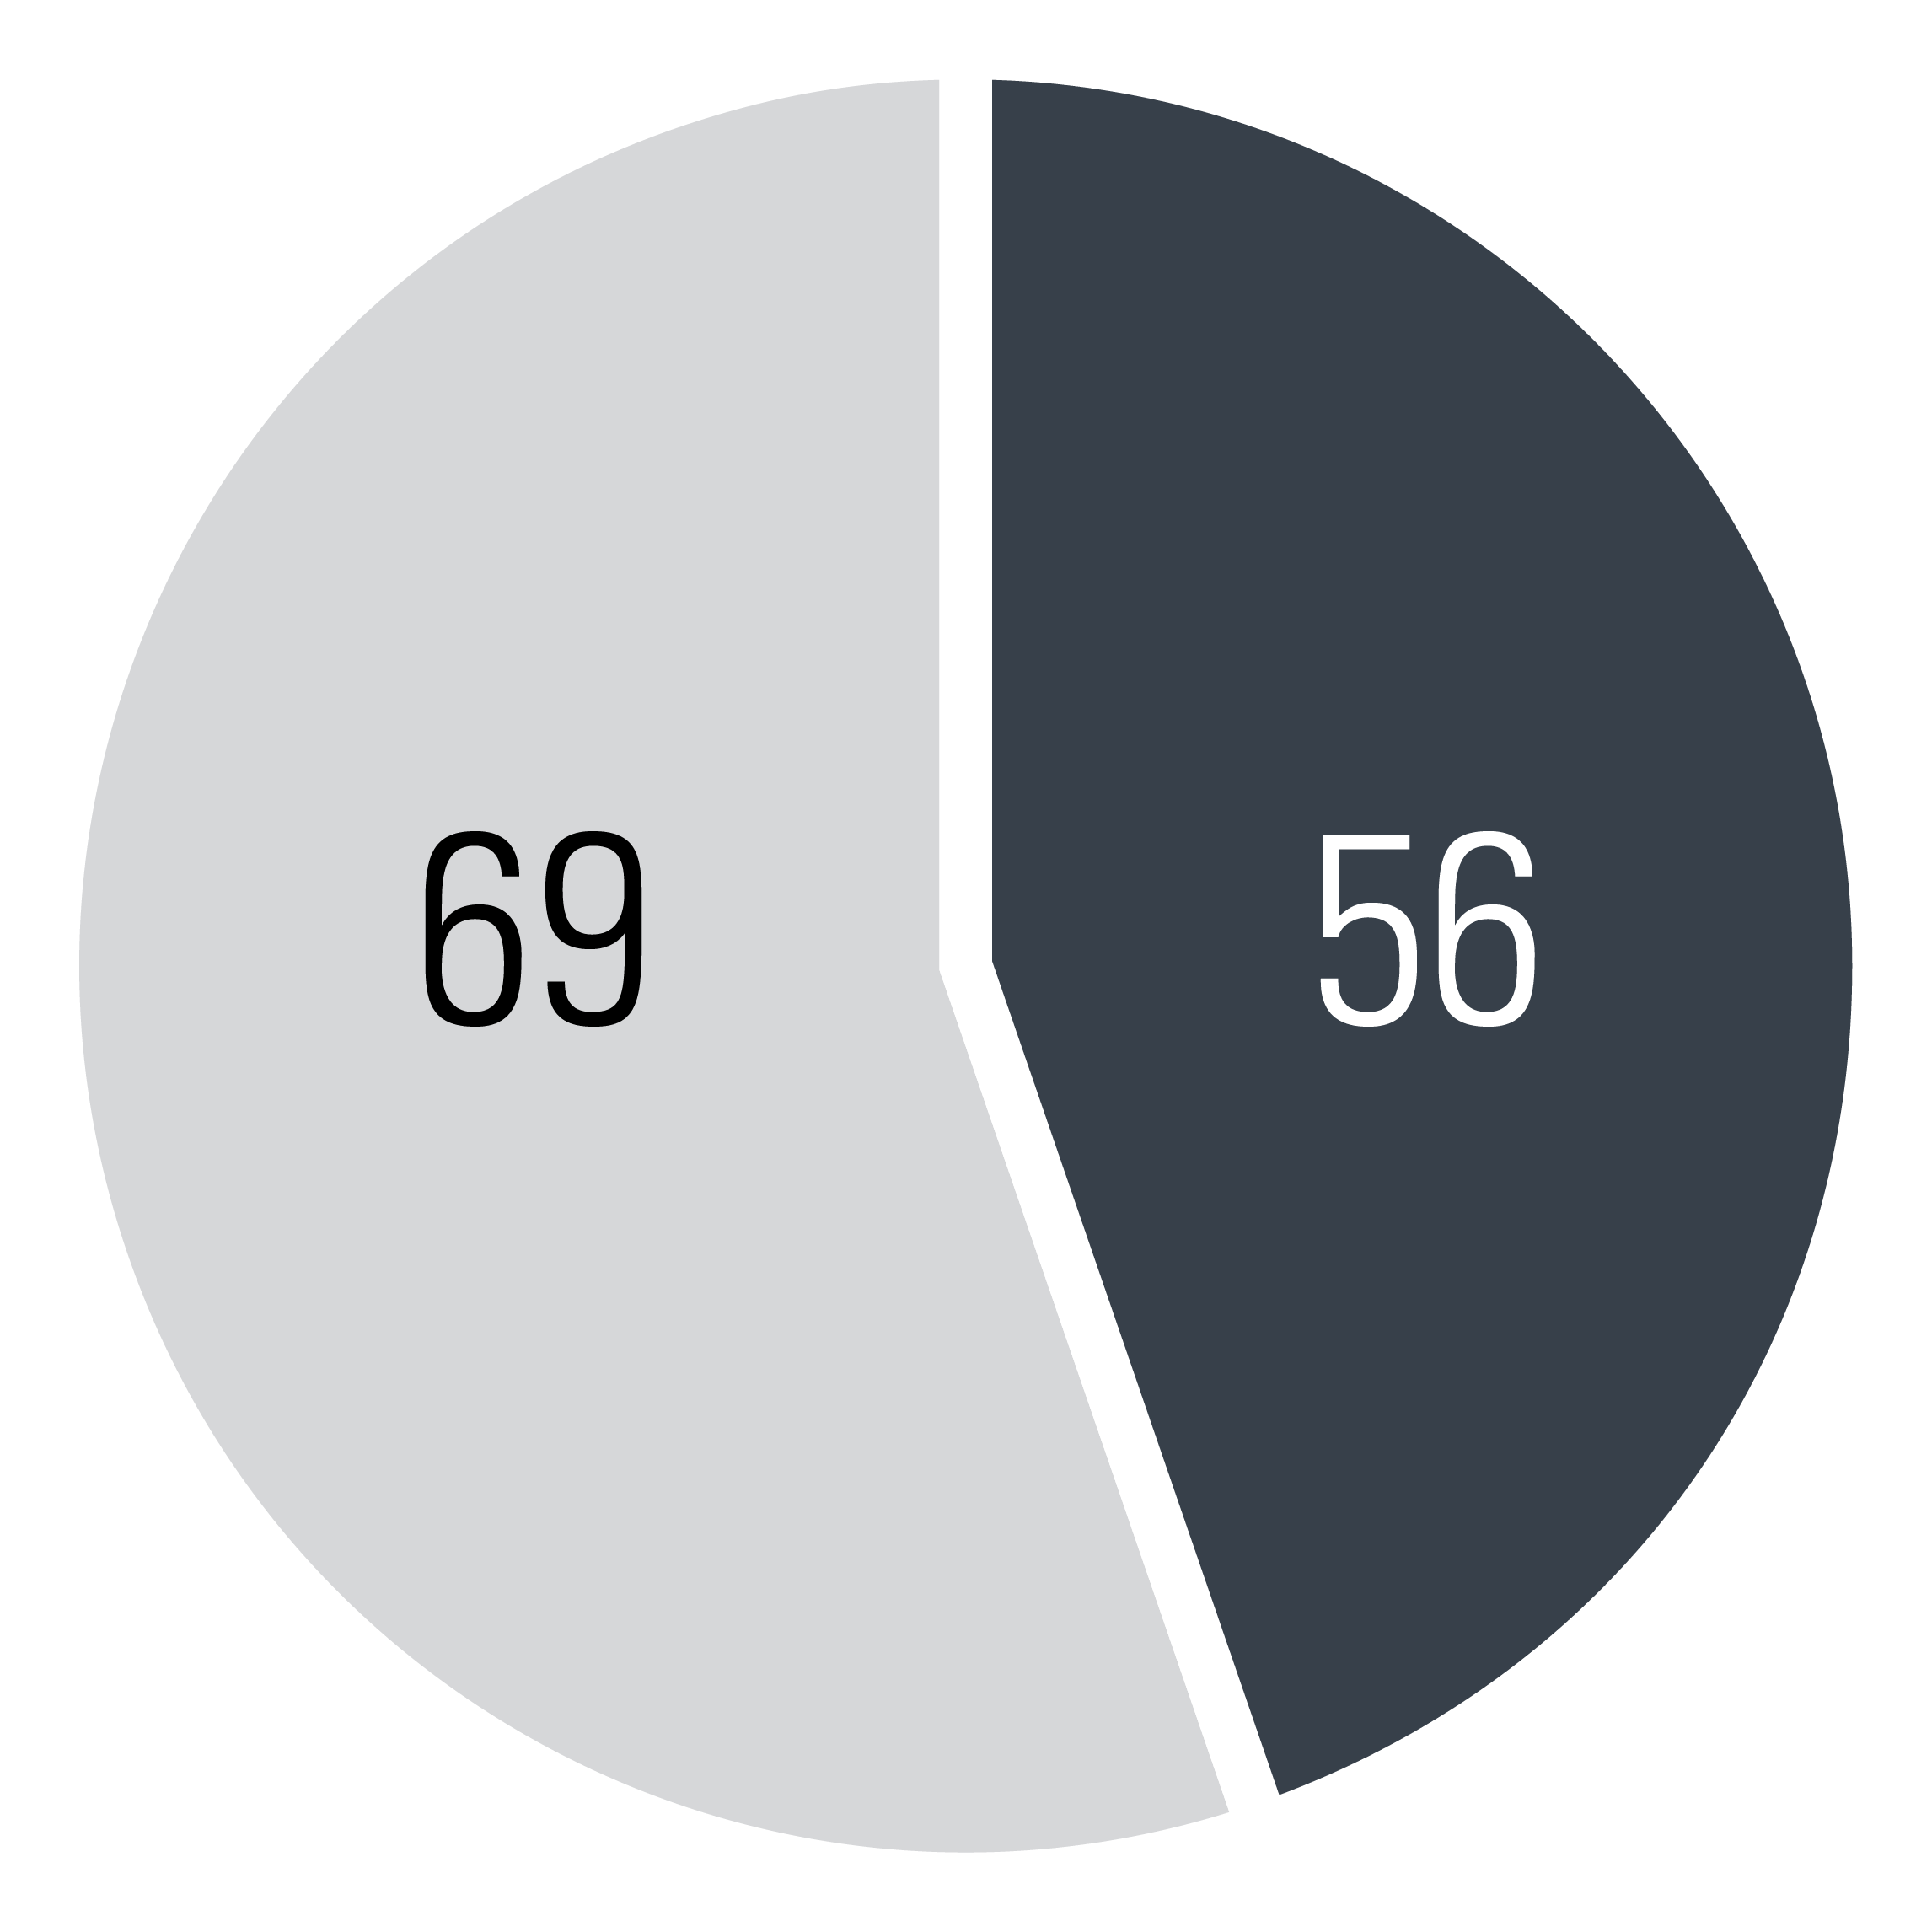 Number of Travellers